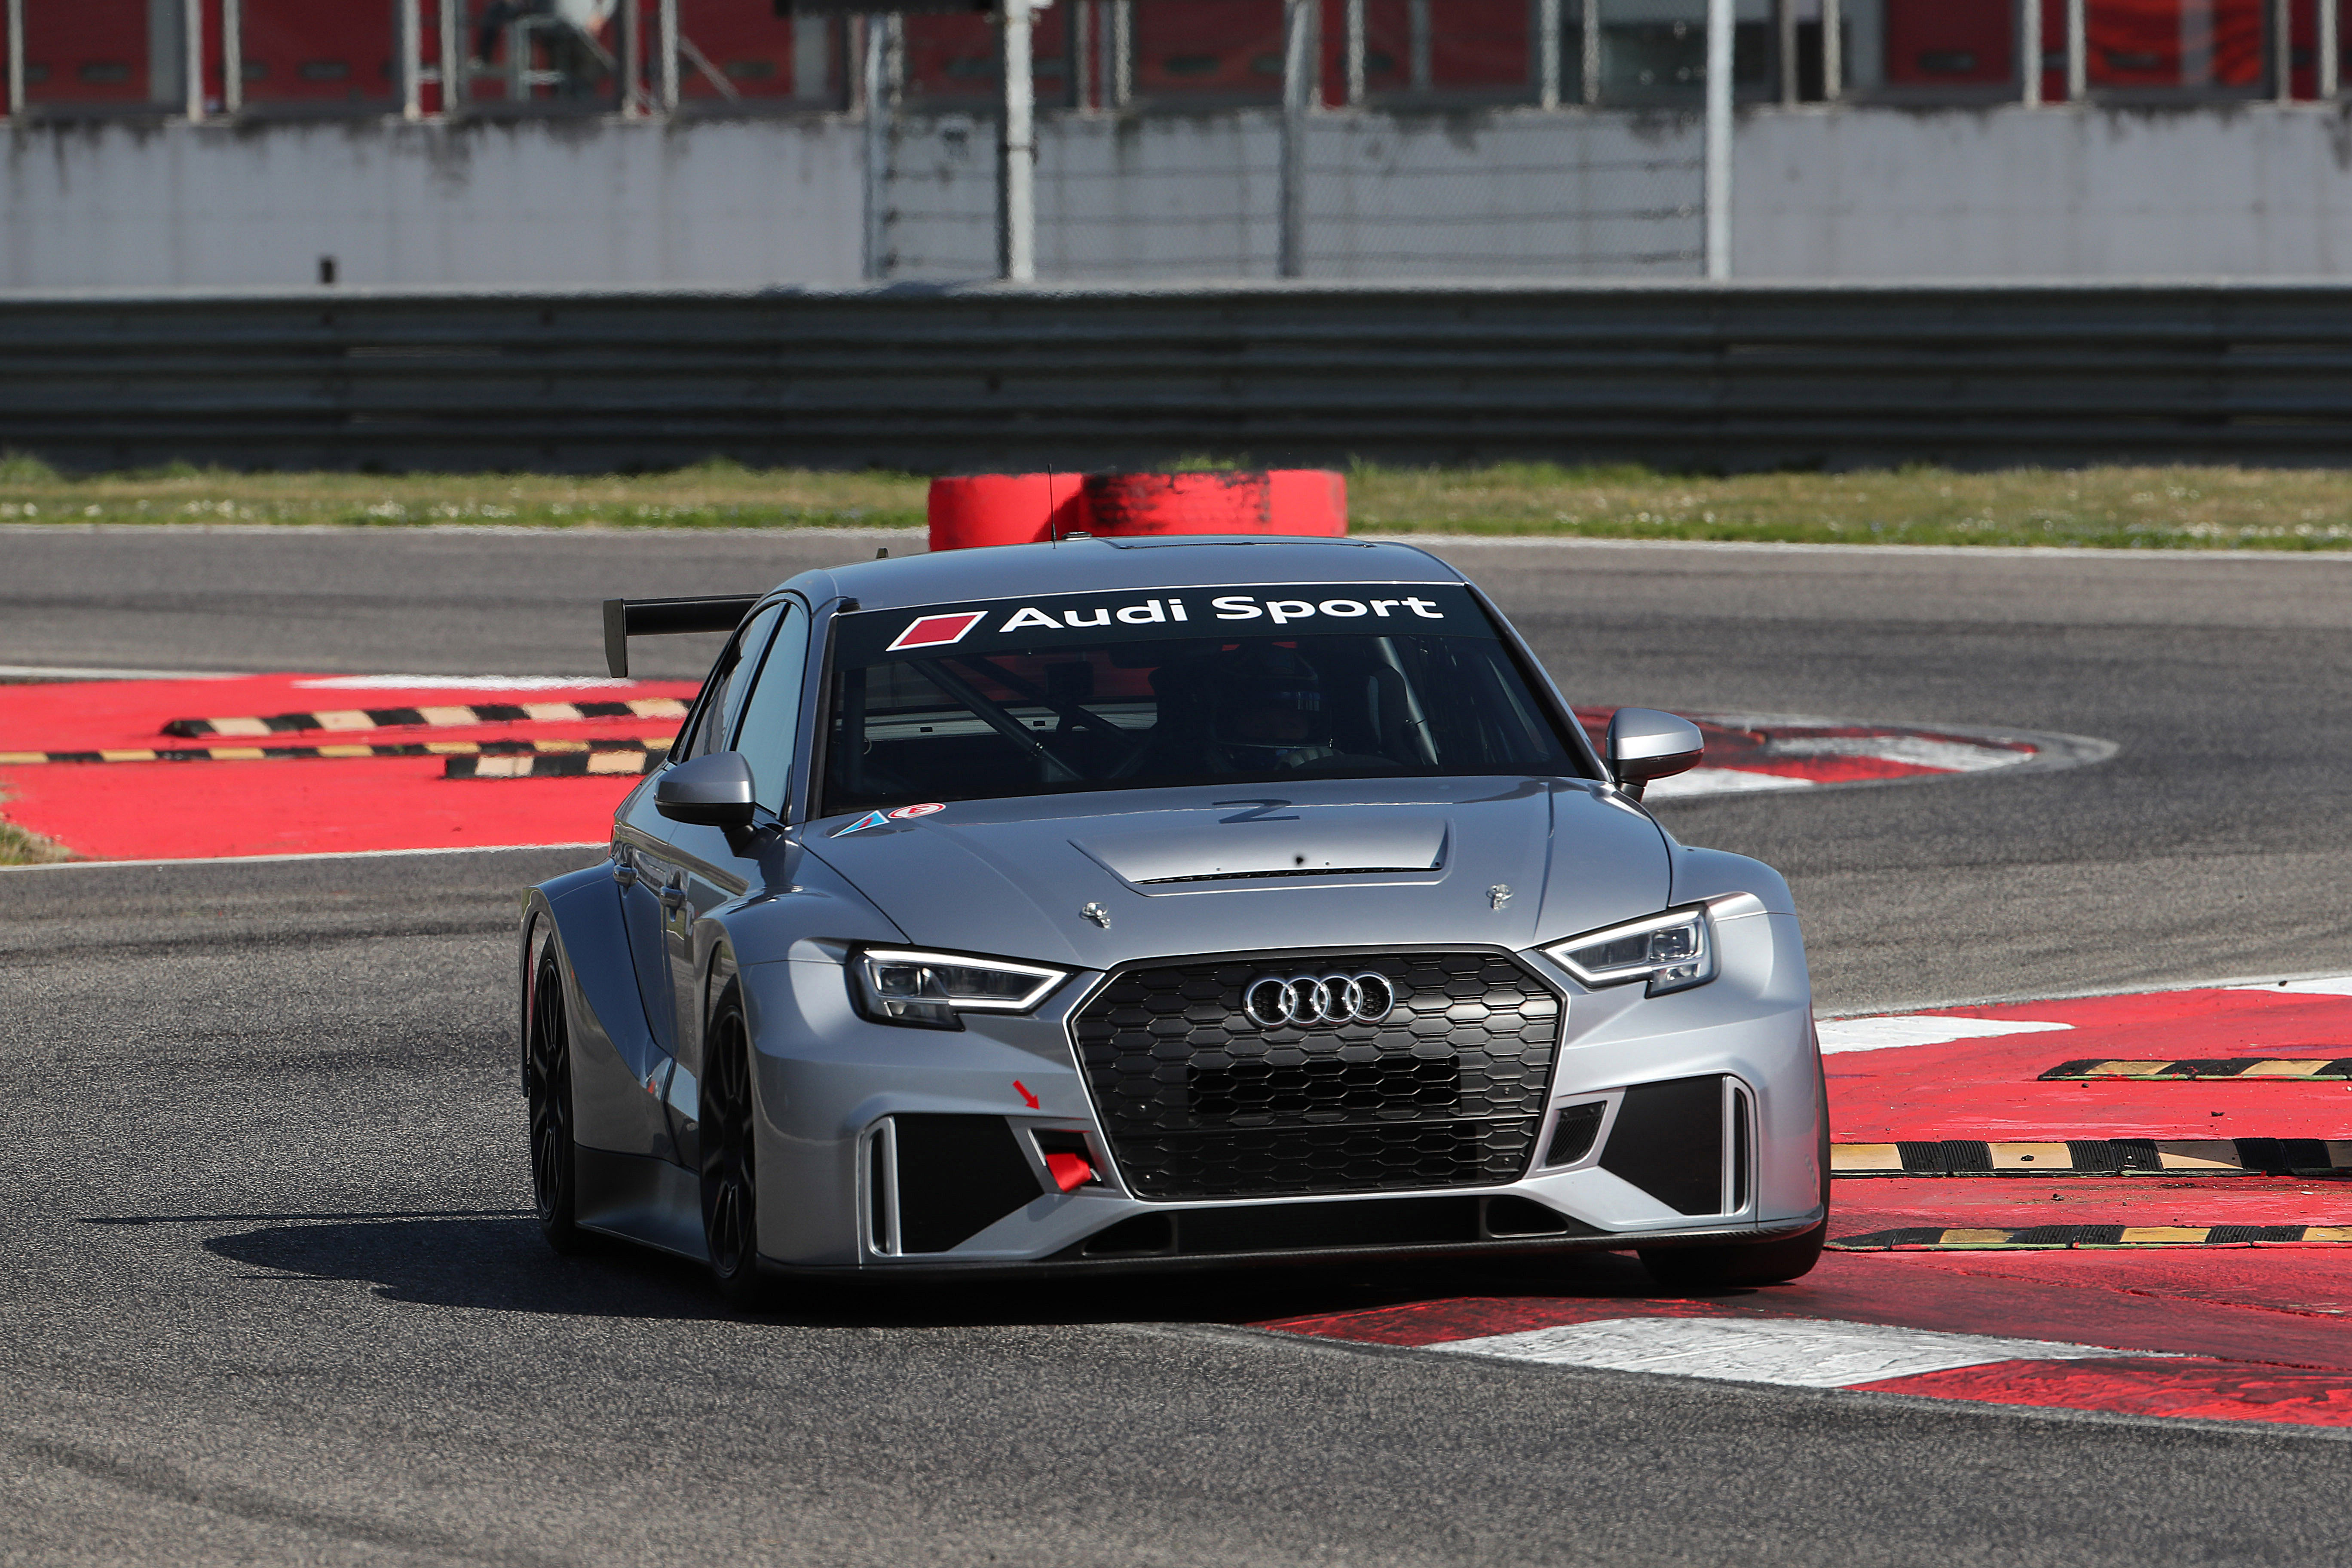 Balance of Performance: the Audi is the heaviest car